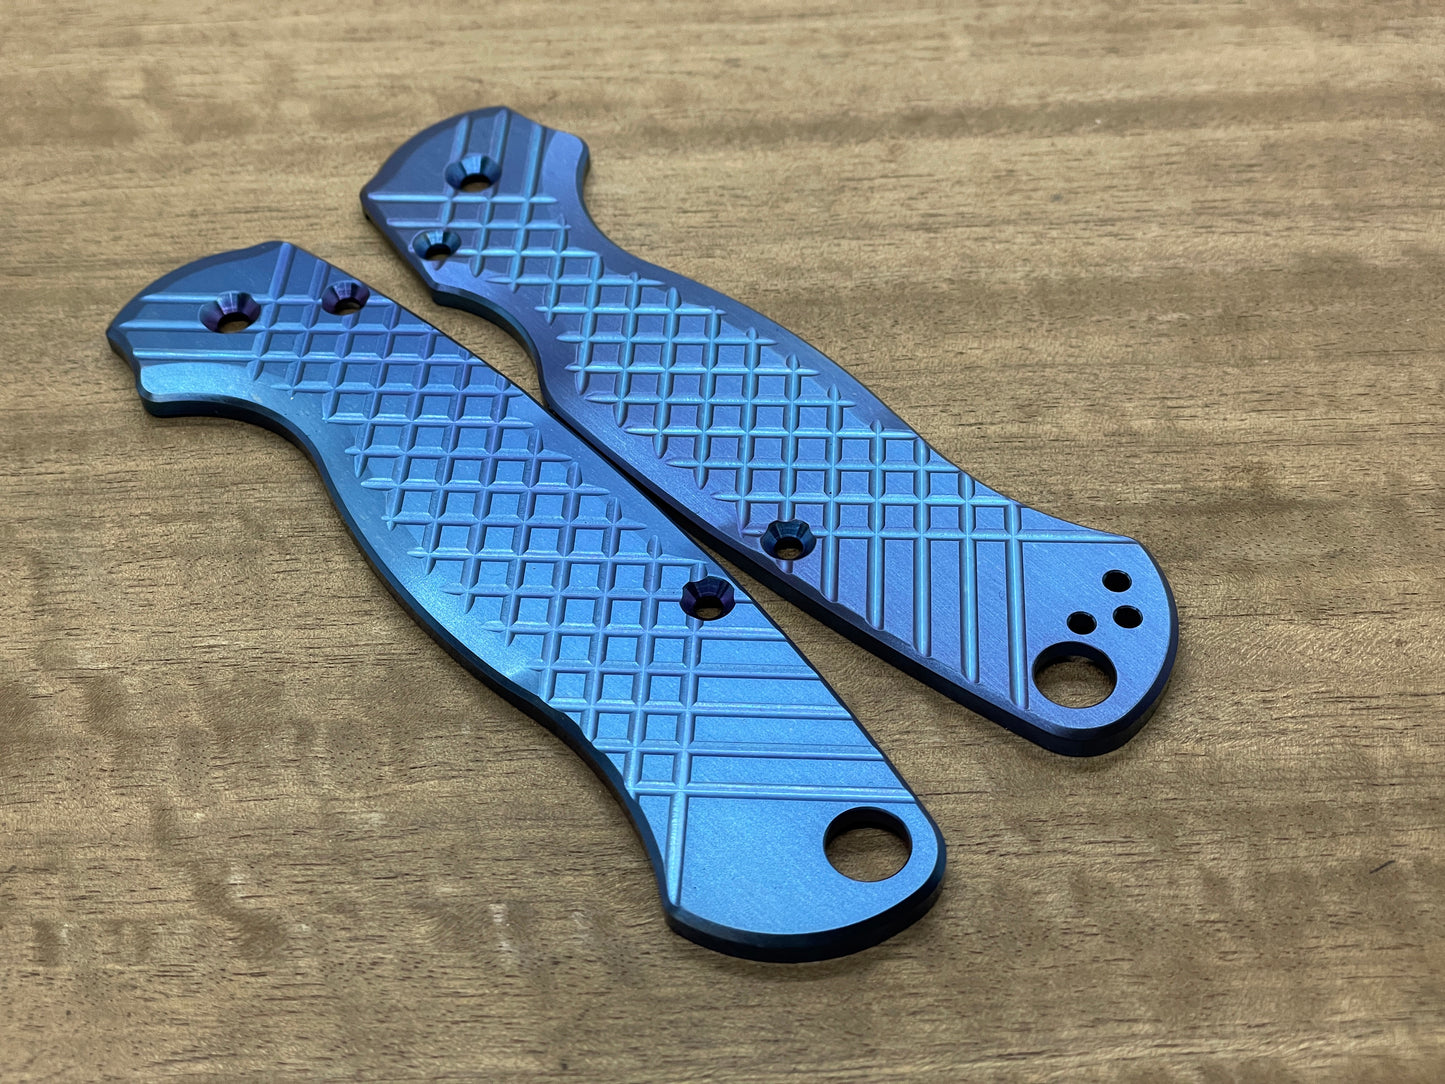 Blue anodized FRAG milled Titanium scales for Spyderco Paramilitary 2 PM2